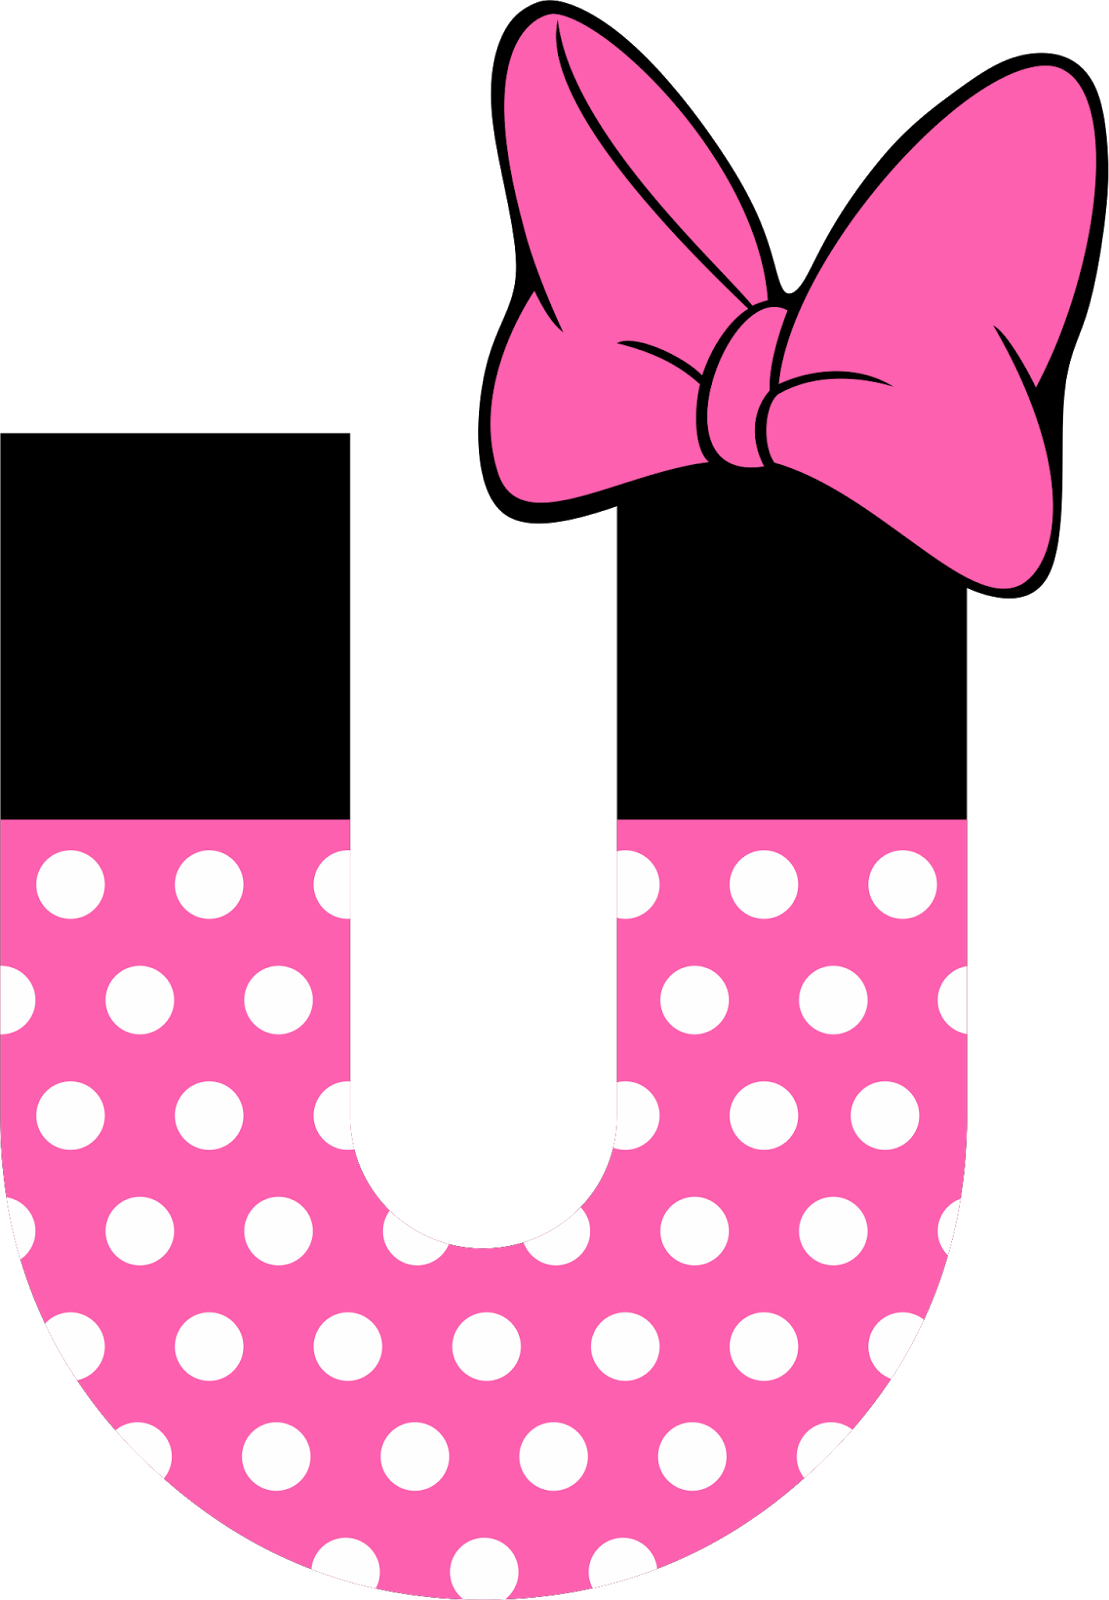 grafos-minnieU.png (1109×1600) | Minnie mouse silhouette, Mickey mouse ...